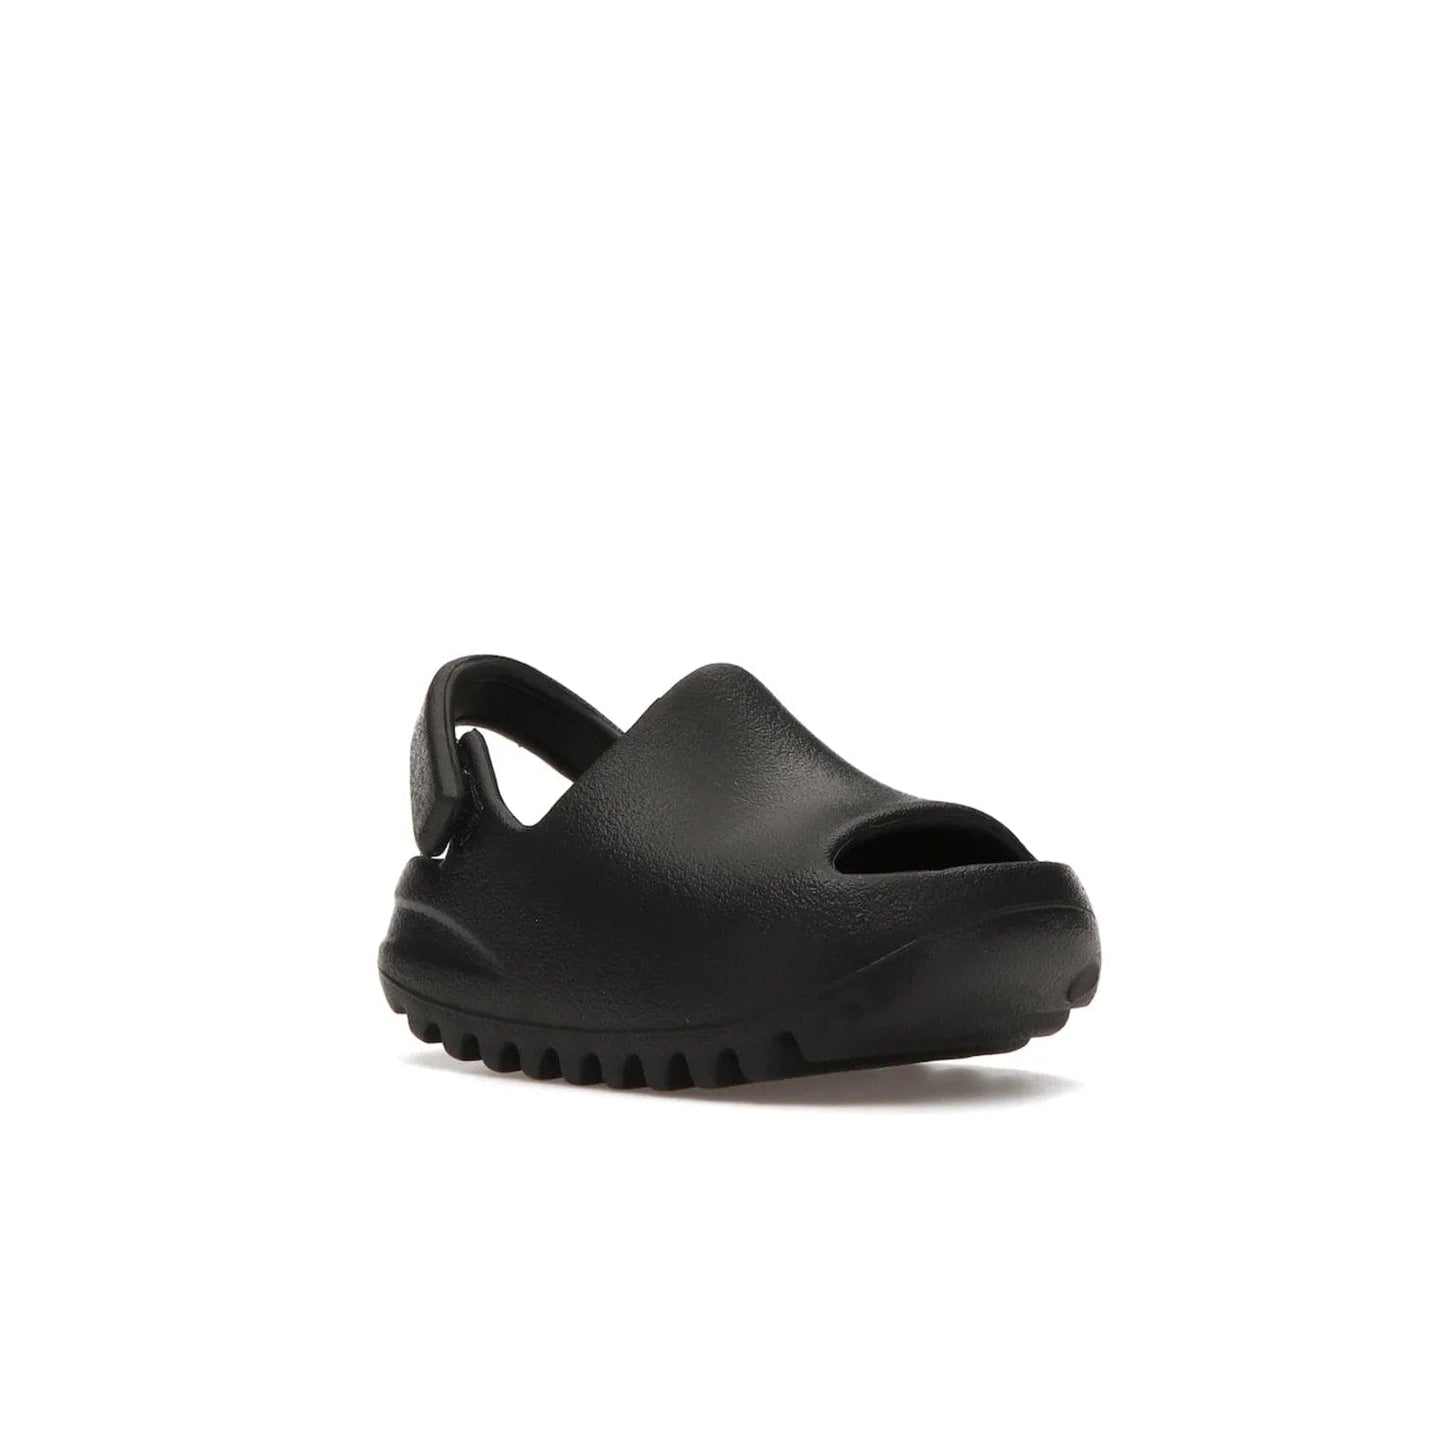 adidas Yeezy Slide Onyx (Infants) - Image 5 - Only at www.BallersClubKickz.com - The Adidas Yeezy Slide Onyx (Infant) is a classic silhouette with unique features and durable EVA foam. Released in May 2021 with a starting price of $70, it's no wonder it quickly gained popularity with its cool, minimalist look.